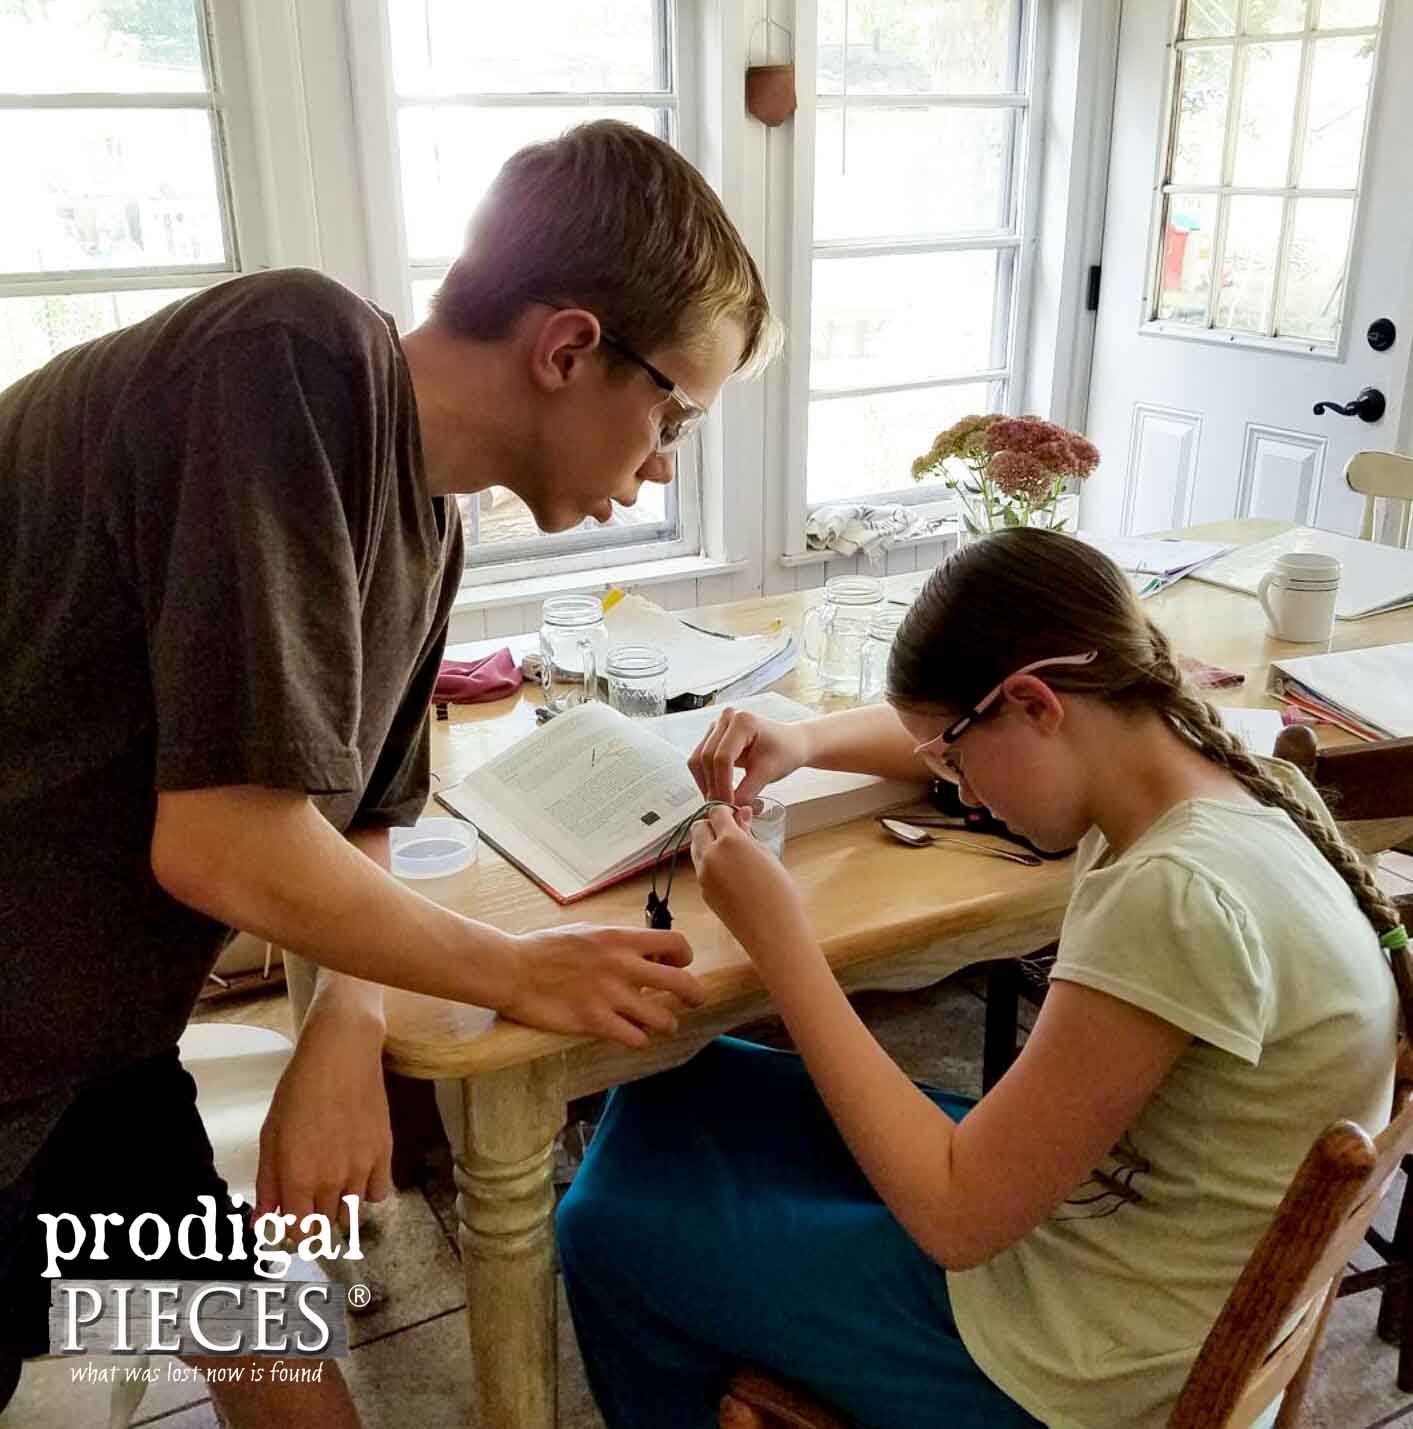 Homeschooling My Teenagers while Running a Business and Blog from Home | Prodigal Pieces | www.prodigalpieces.com